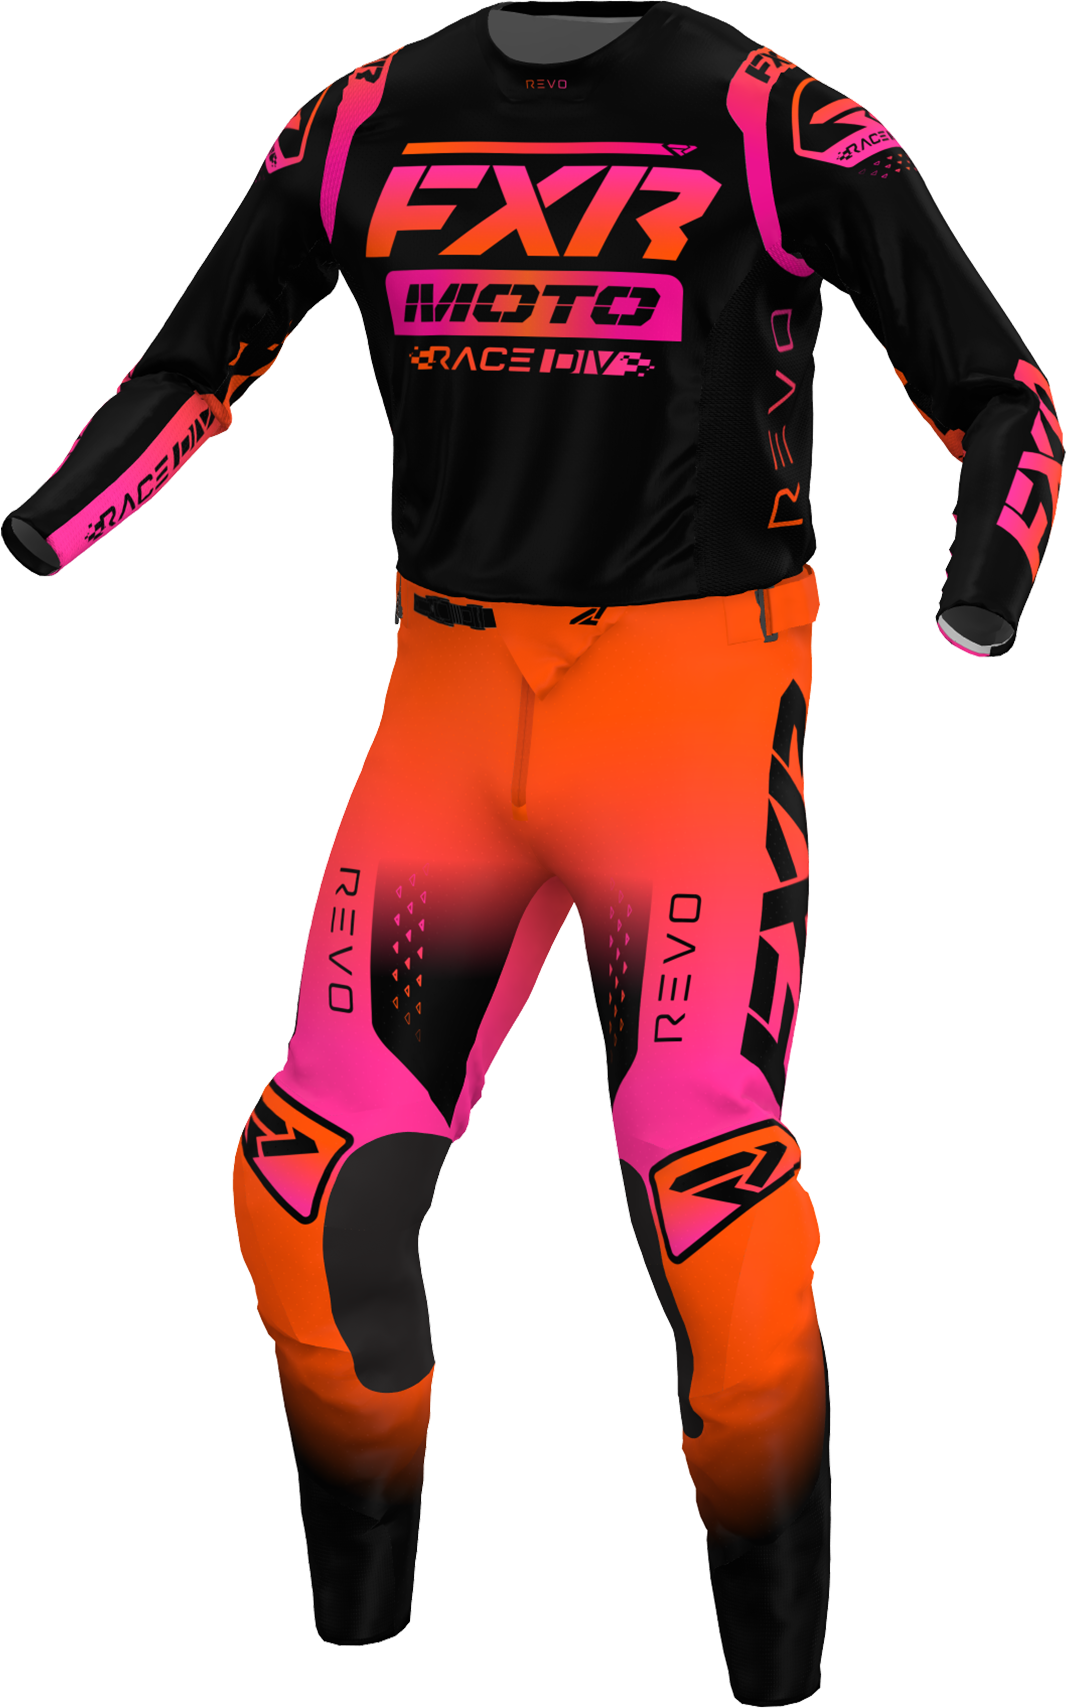 A 3D image of FXR's Revo Comp MX Jersey and Pant in Fla-Mango/Black colorway